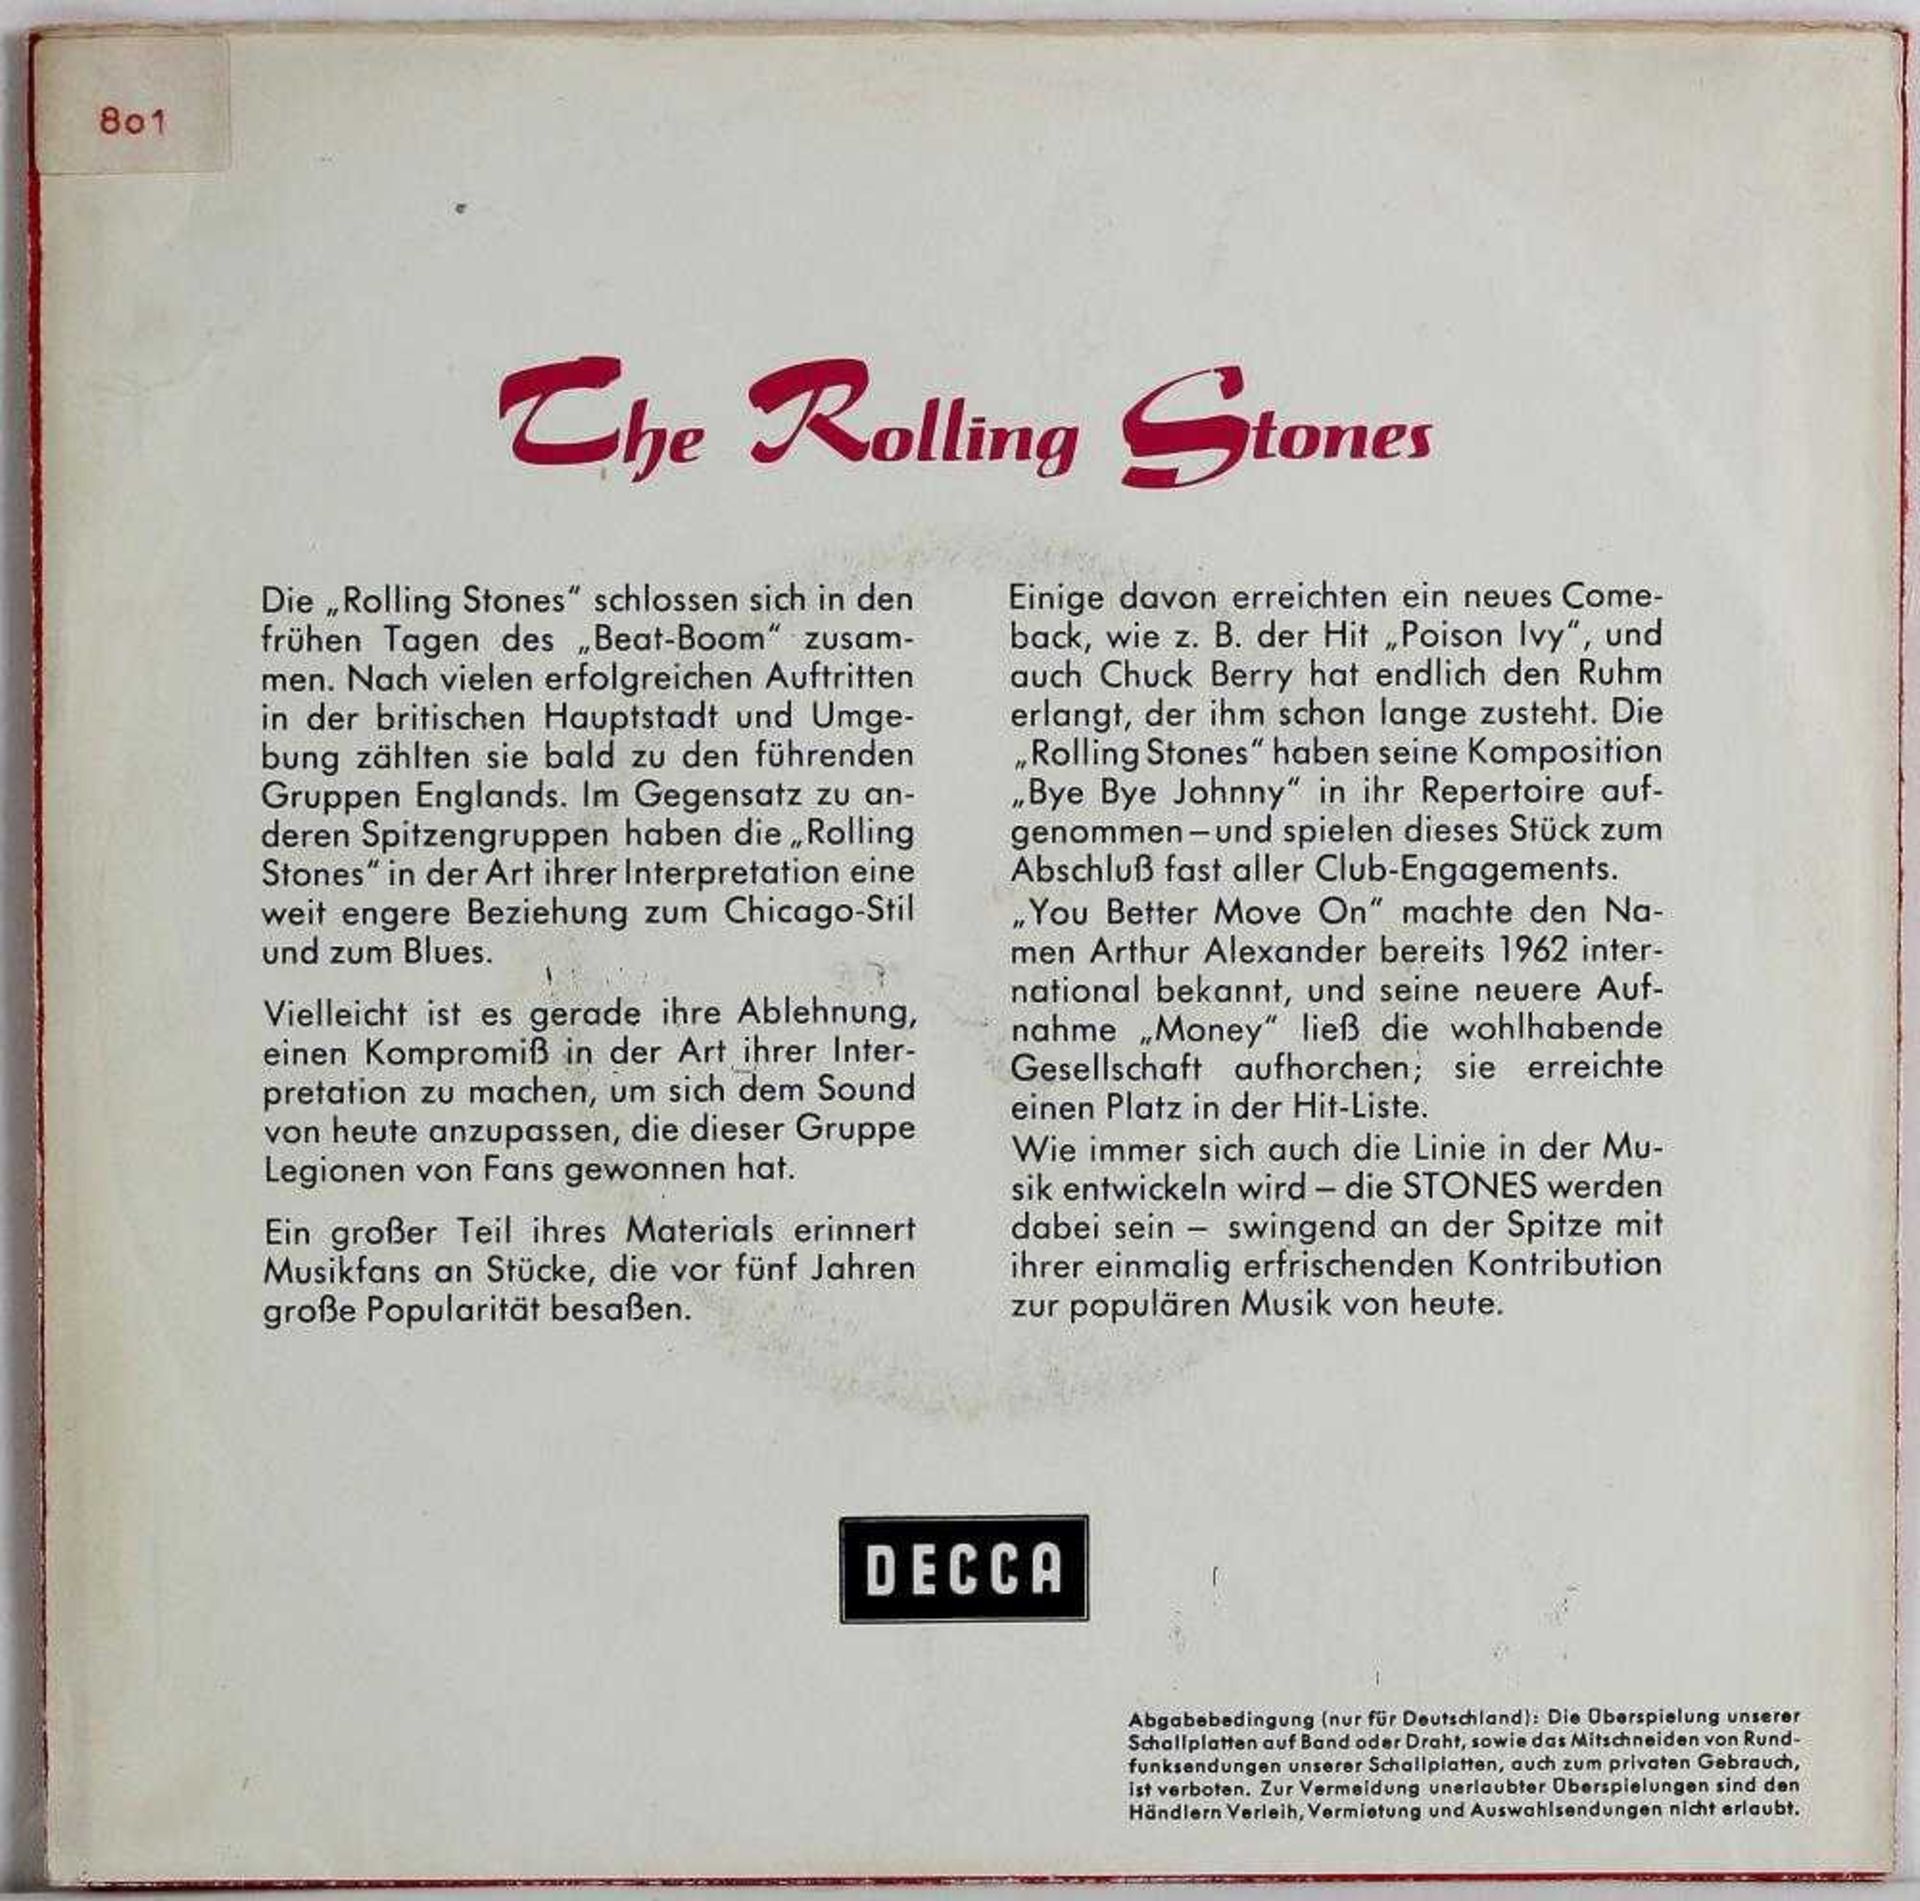 The Rolling Stones It´s All Over Now, Tell Me. Single, Decca DL 25144. (deutsche Erstpressung 1964). - Image 2 of 4